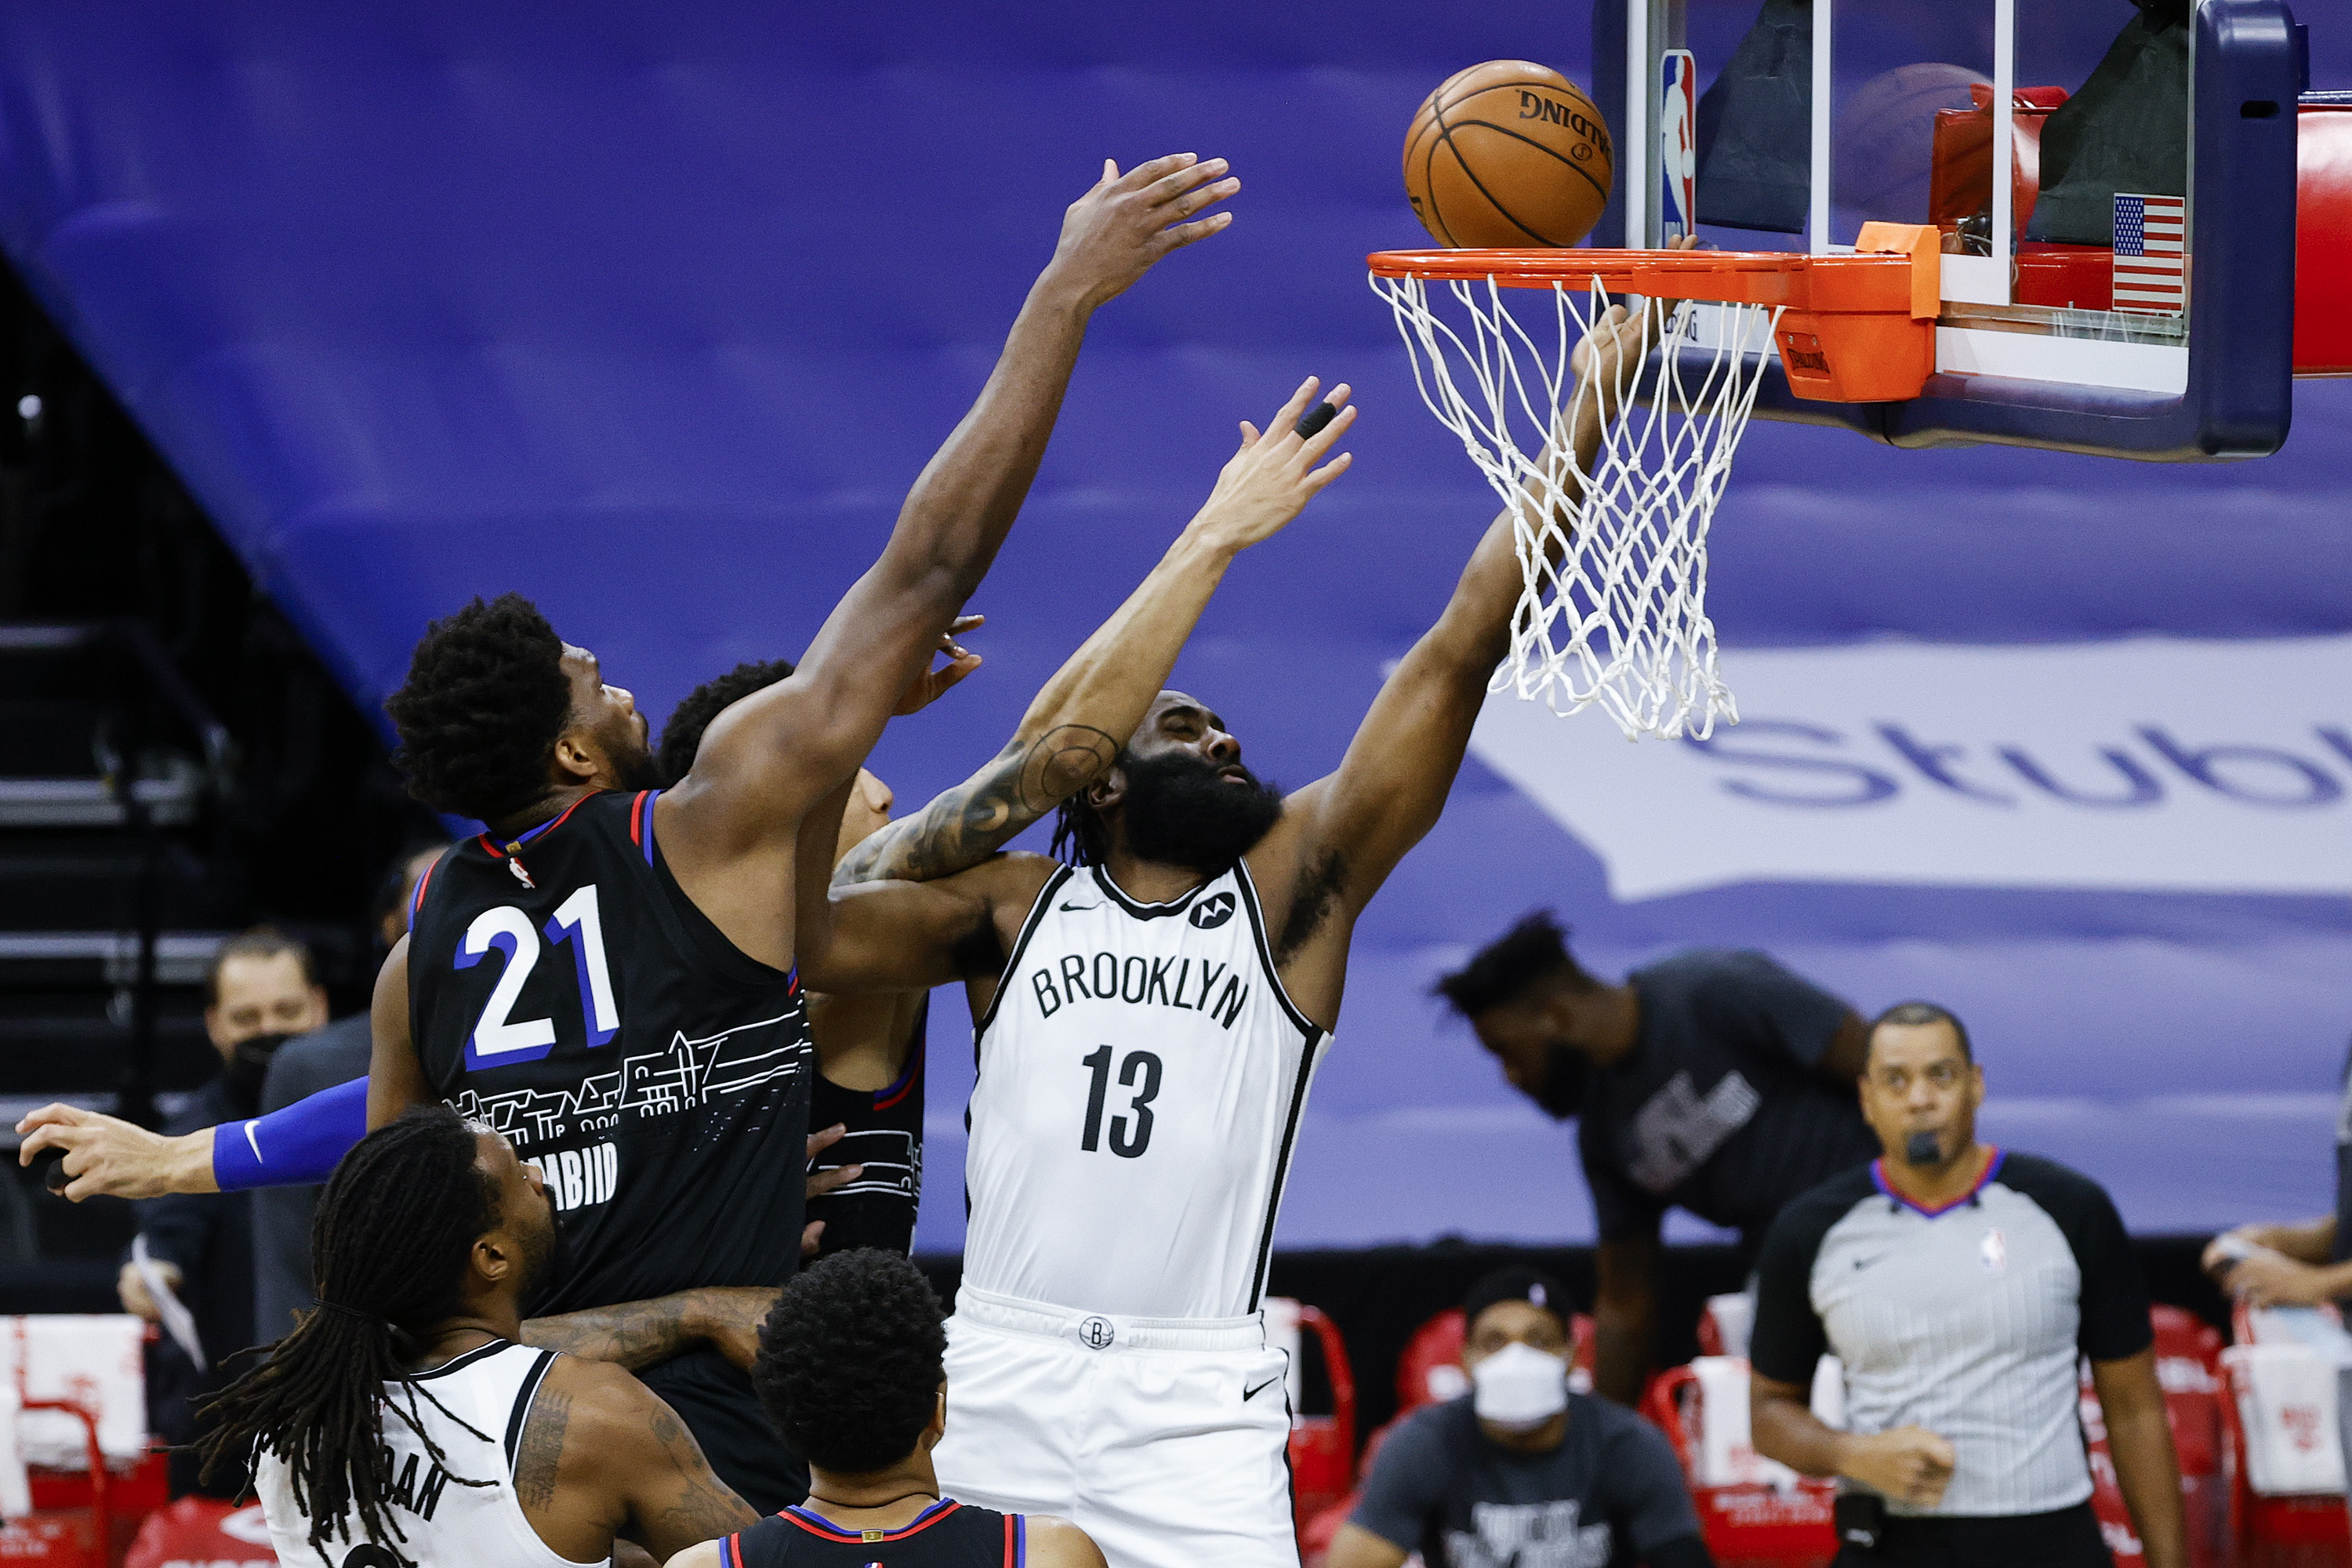 James Harden goes up for a layup against Philadelphia 76ers center Joel Embiid during an NBA game in February 2021